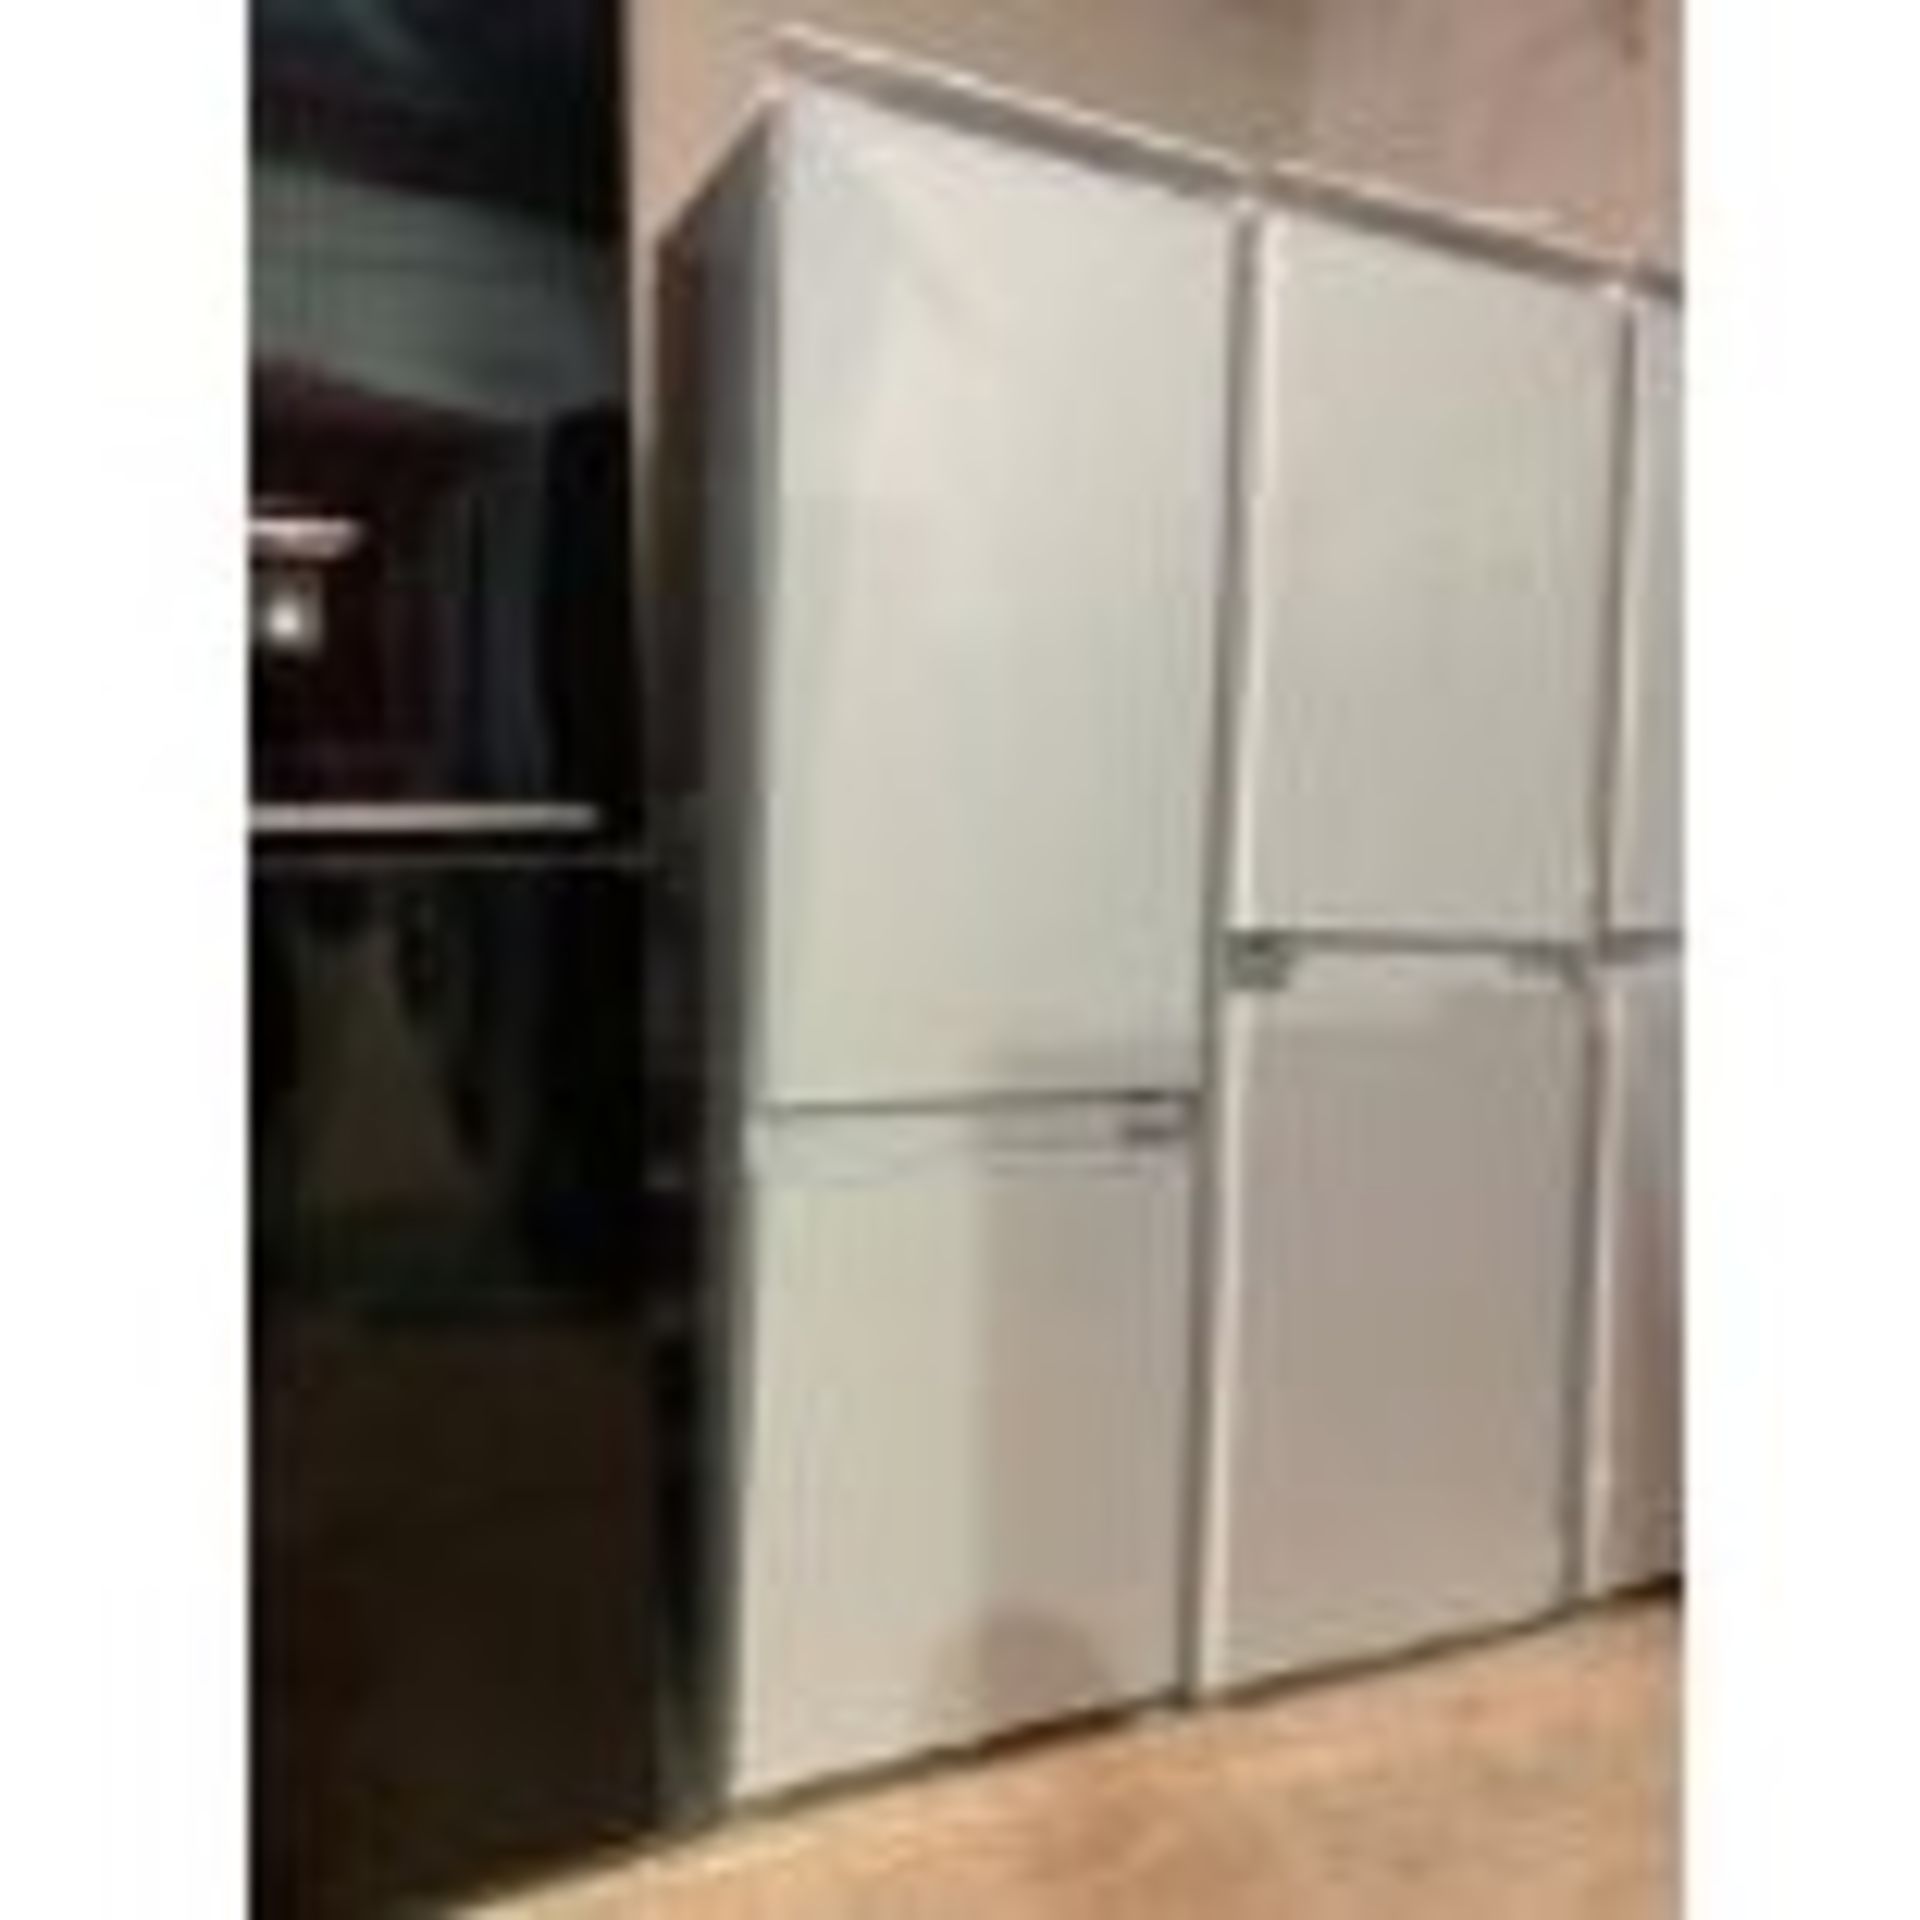 KENWOOD INTEGRATED FROST FREE FRIDGE FREEZER - KIFF7020 (OPENS TO THE RIGHT) - Image 2 of 5